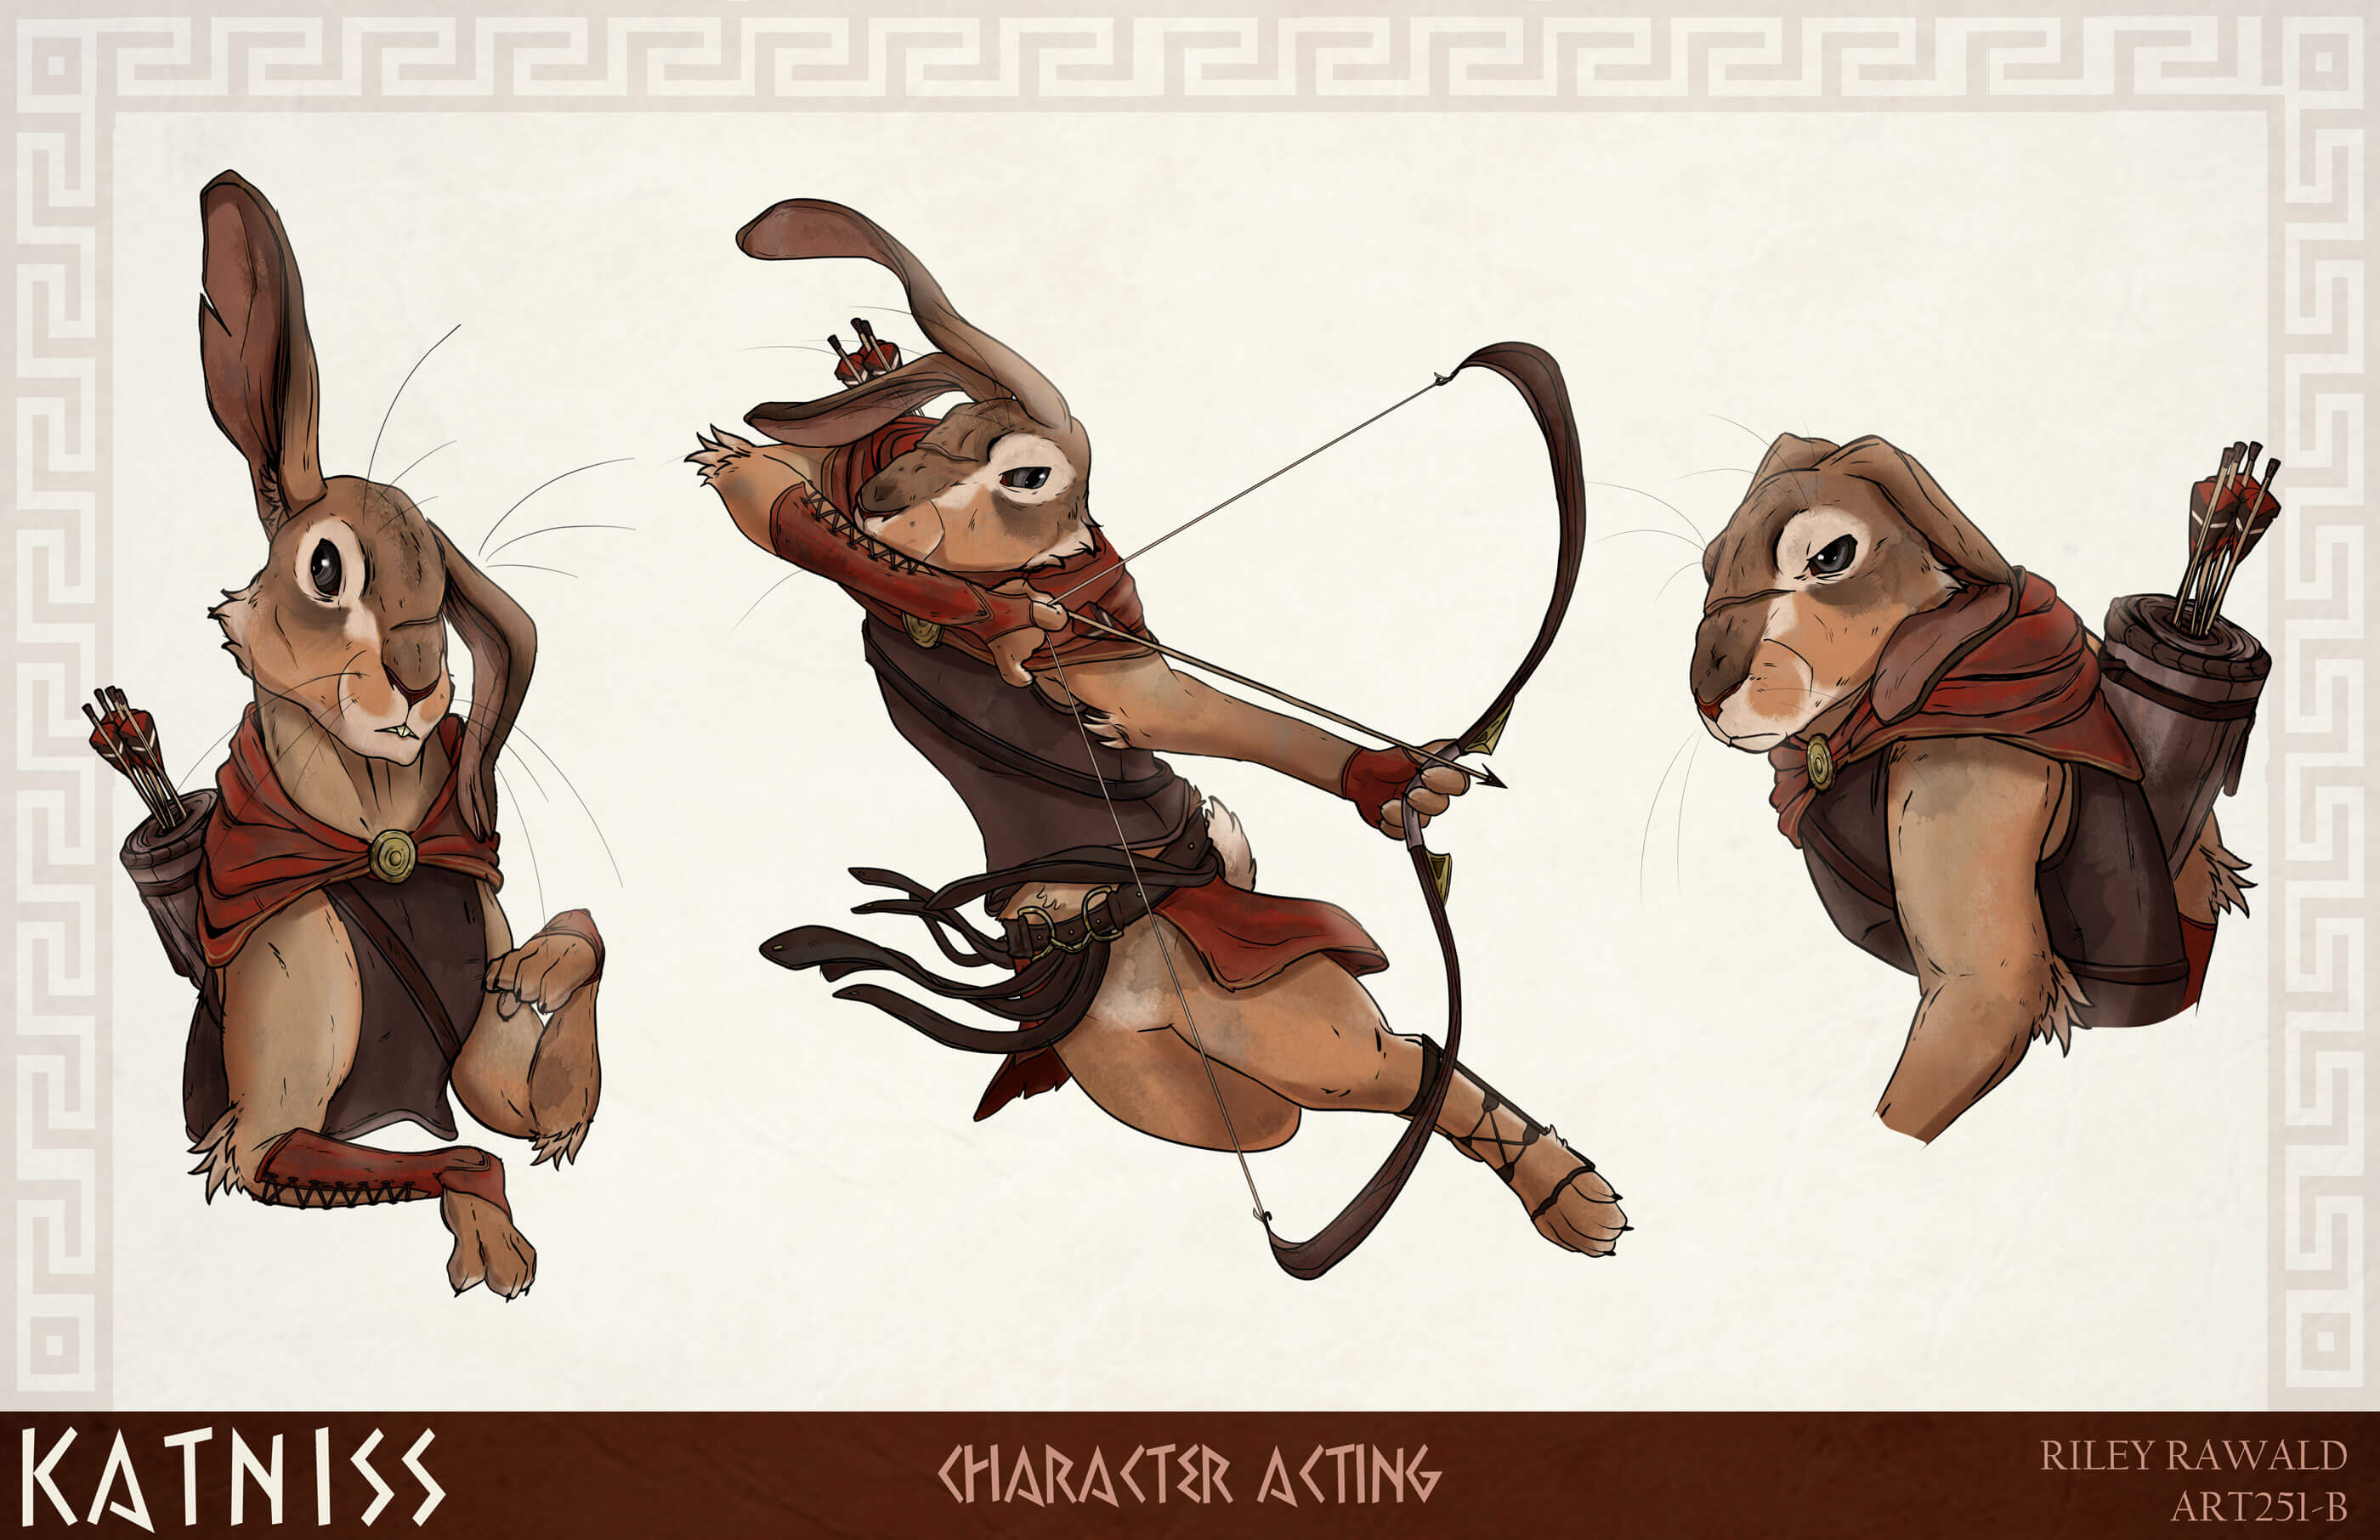 A humanoid rabbit who wields a bow and arrow.